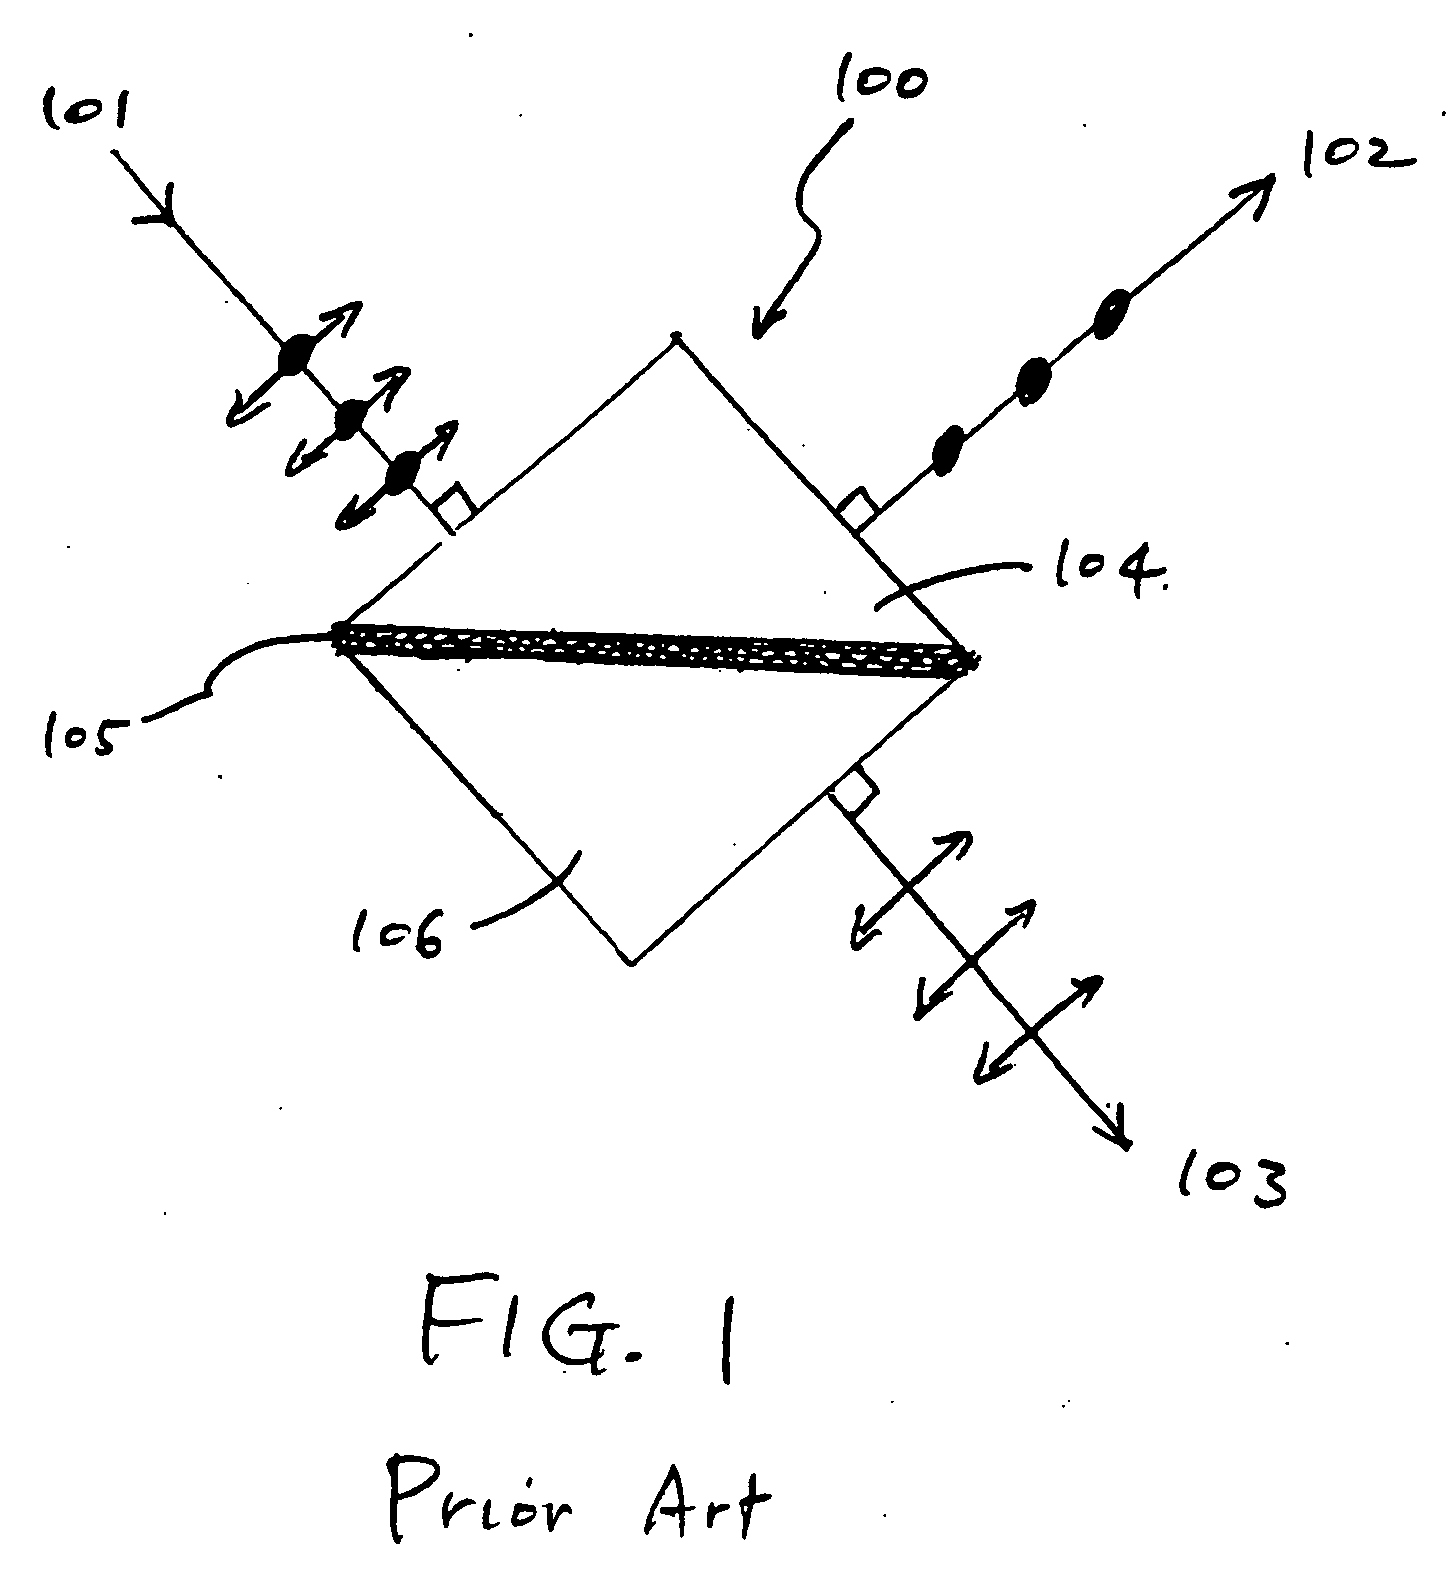 Optical device for splitting an incident light into simultaneously spectrally separated and orthogonally polarized light beams having complementary primary color bands